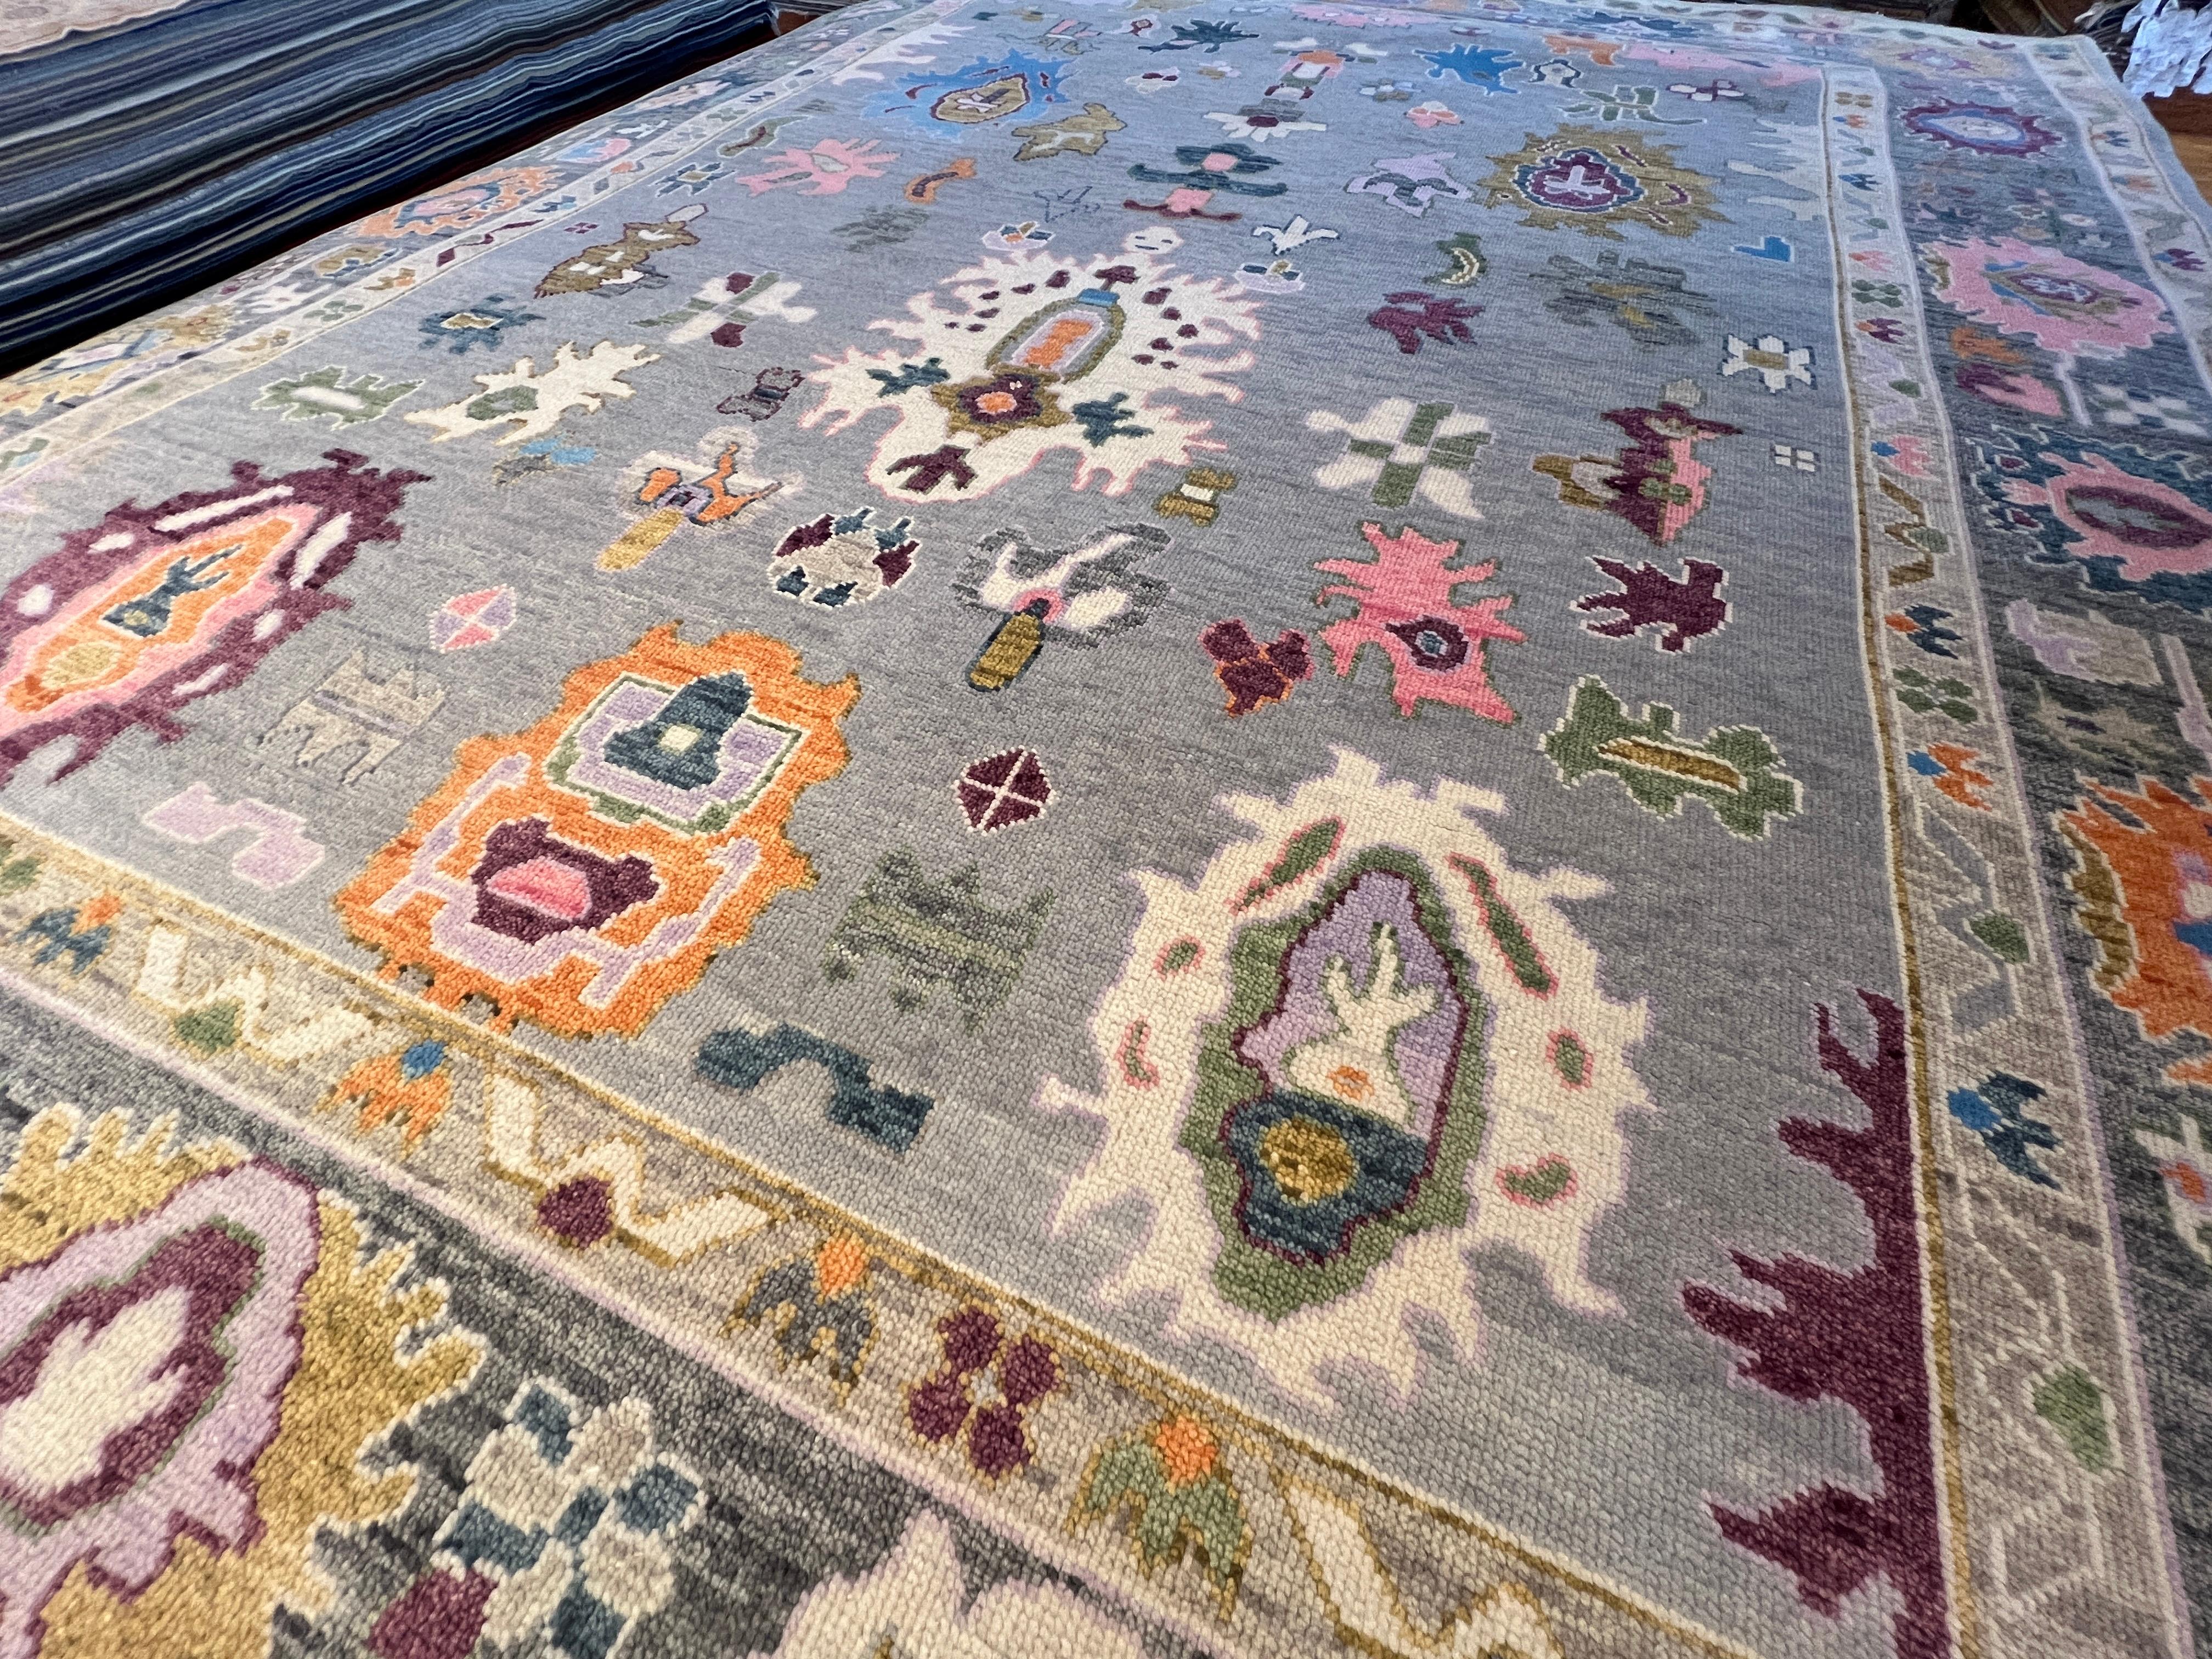 Elevate your space with our 9'x12' Persian design grey ivory all wool hand-knotted rug made in India. Featuring a great transitional design, this rug adds style and luxurious comfort to any room. Made with high-quality wool, it's easy to clean,